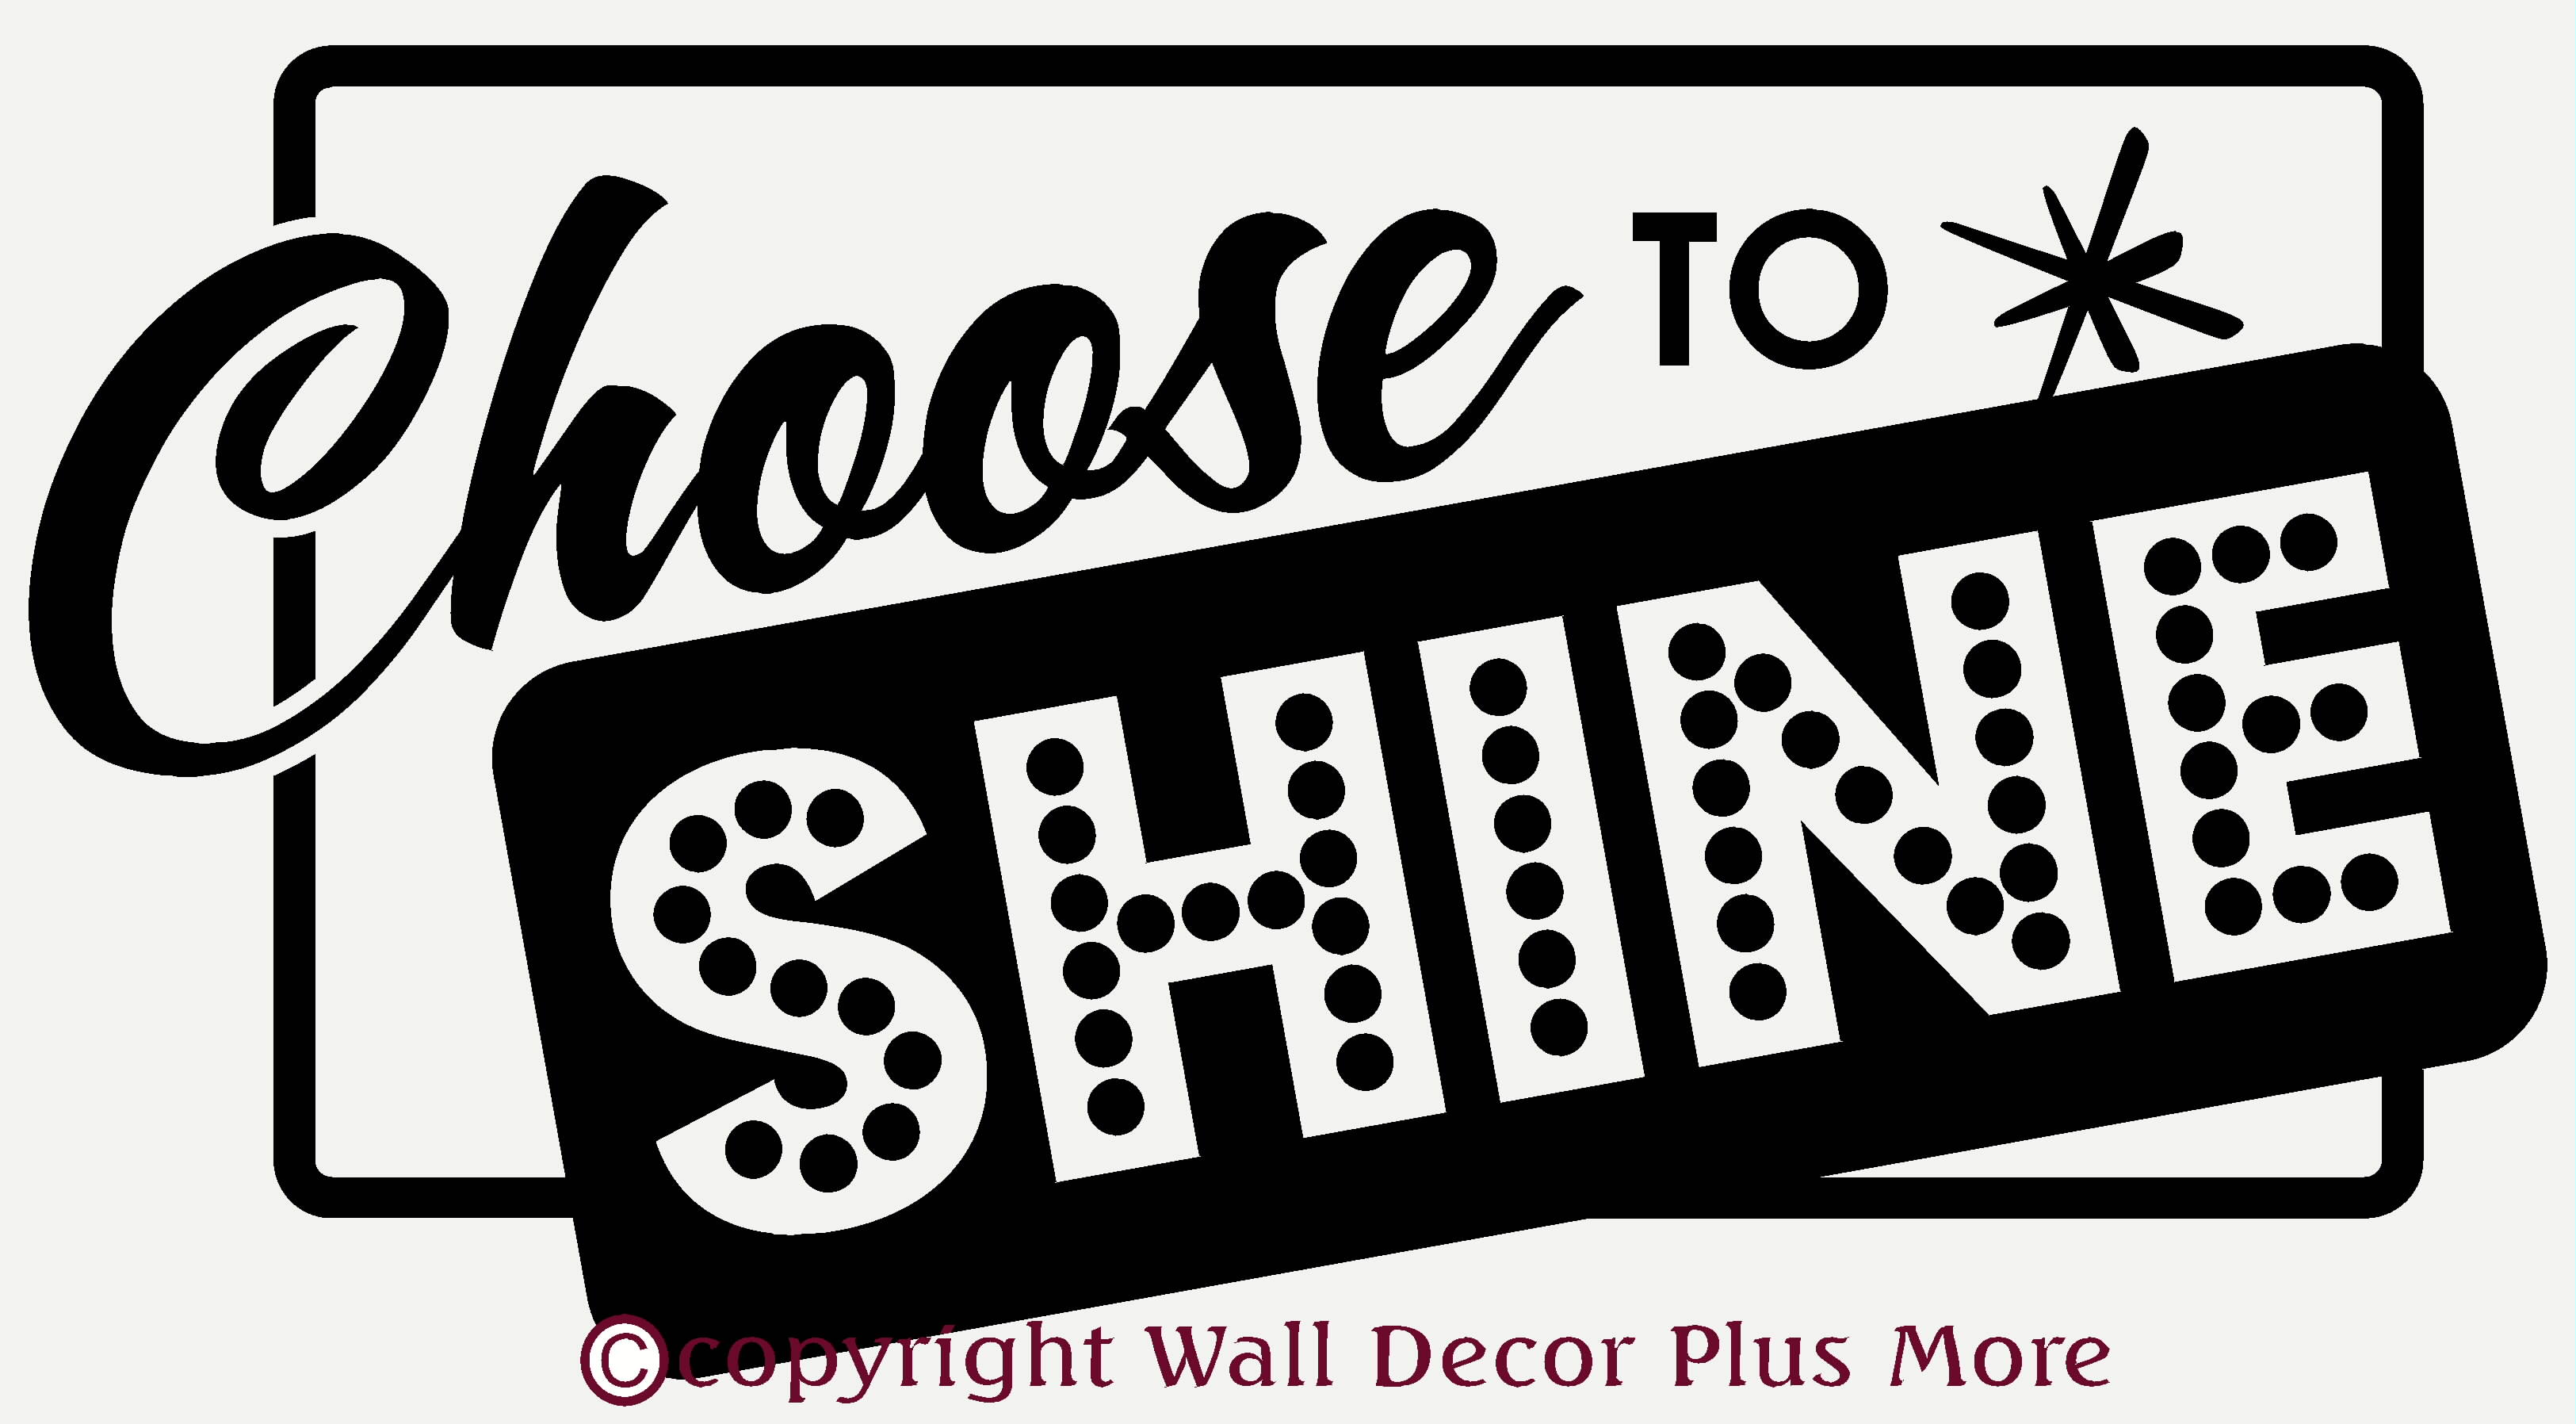 Choose to Shine Wall Decal Quote for the Classroom